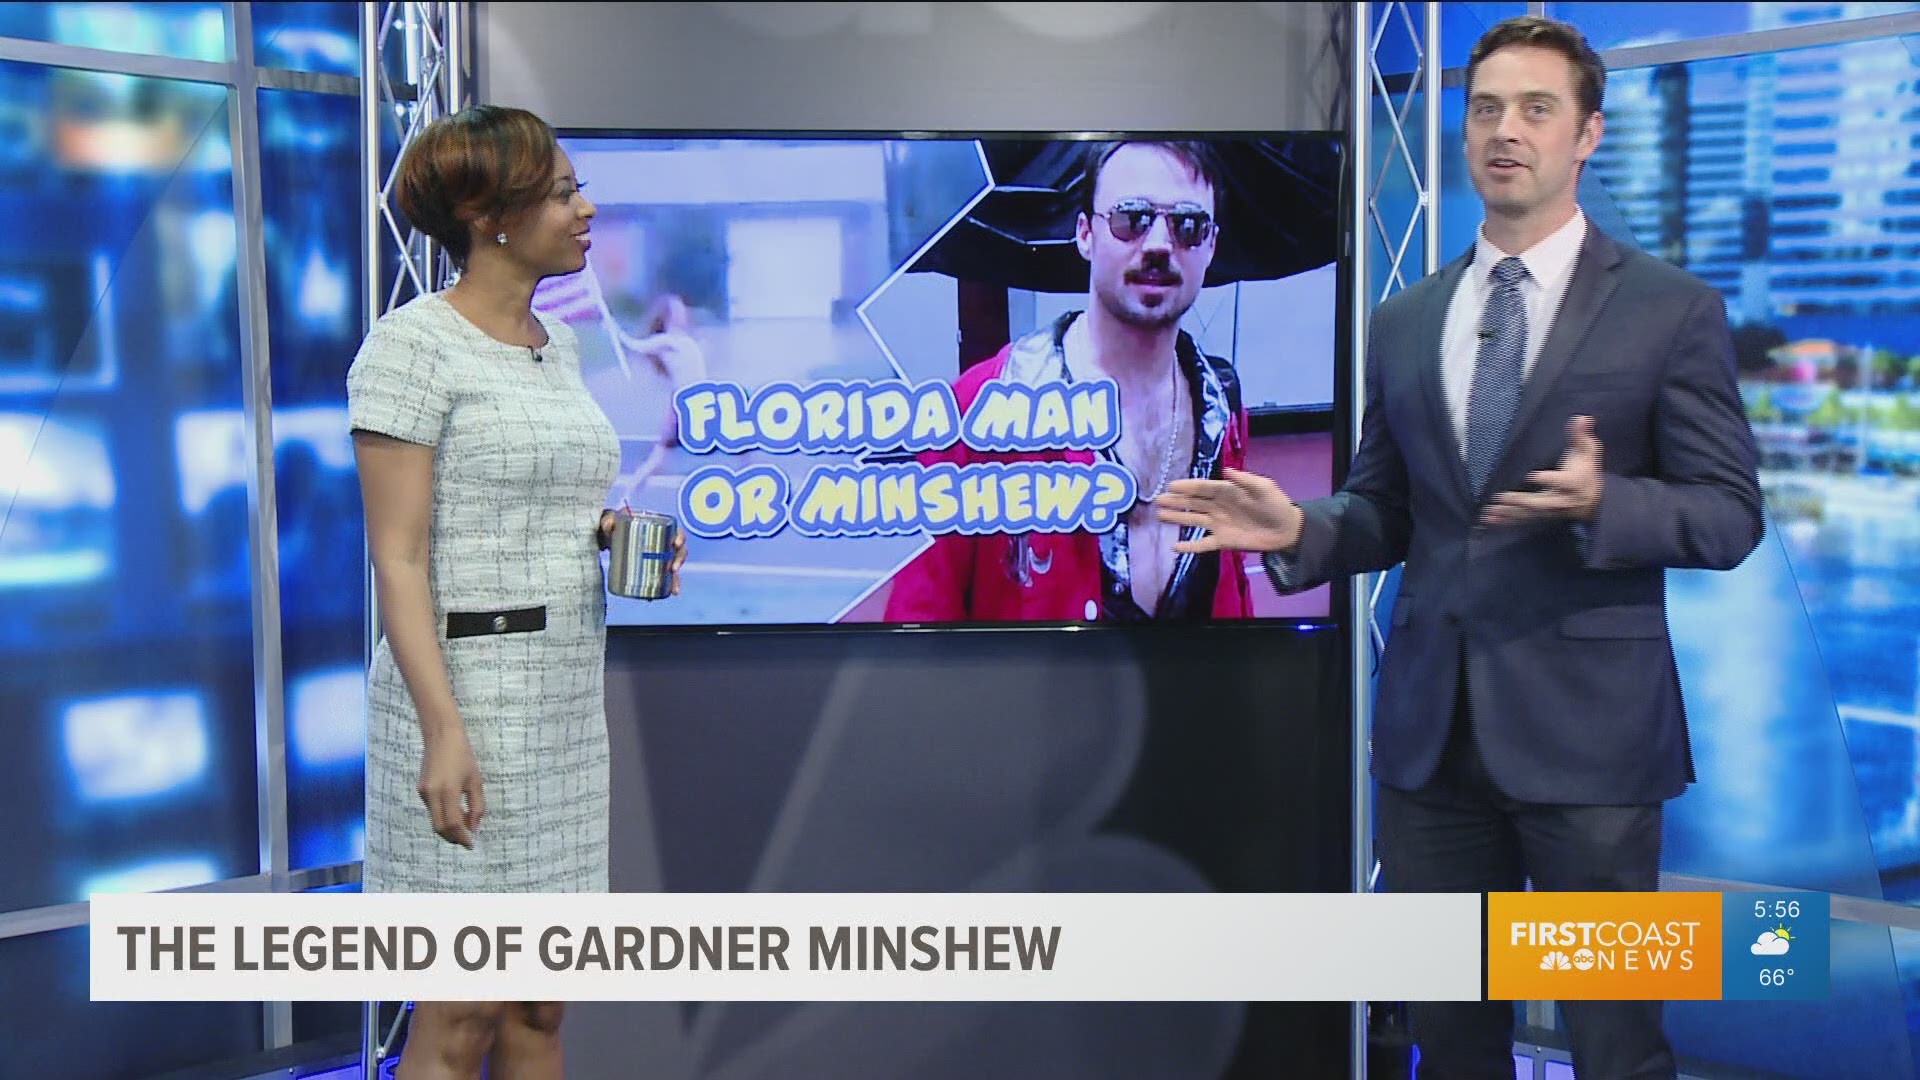 There are a ton of stories floating around about Jaguars' Gardner Minshew. Do you think you could tell the difference between his actions and Florida man?